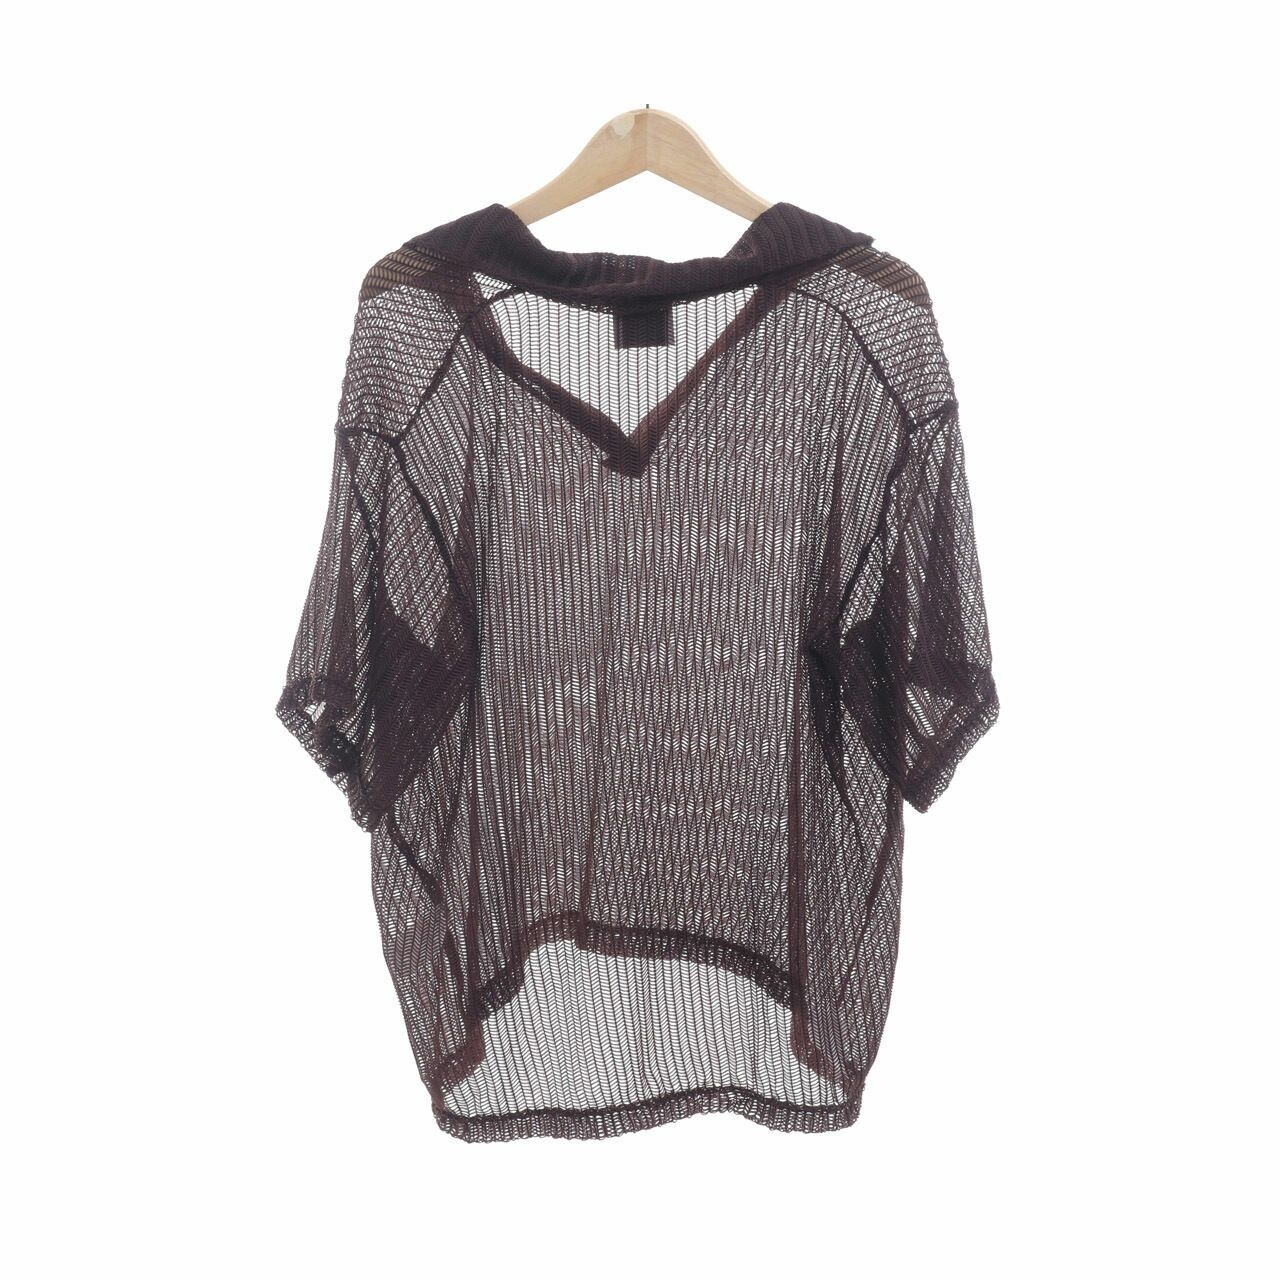 Shop At Velvet Brown Perforated Blouse